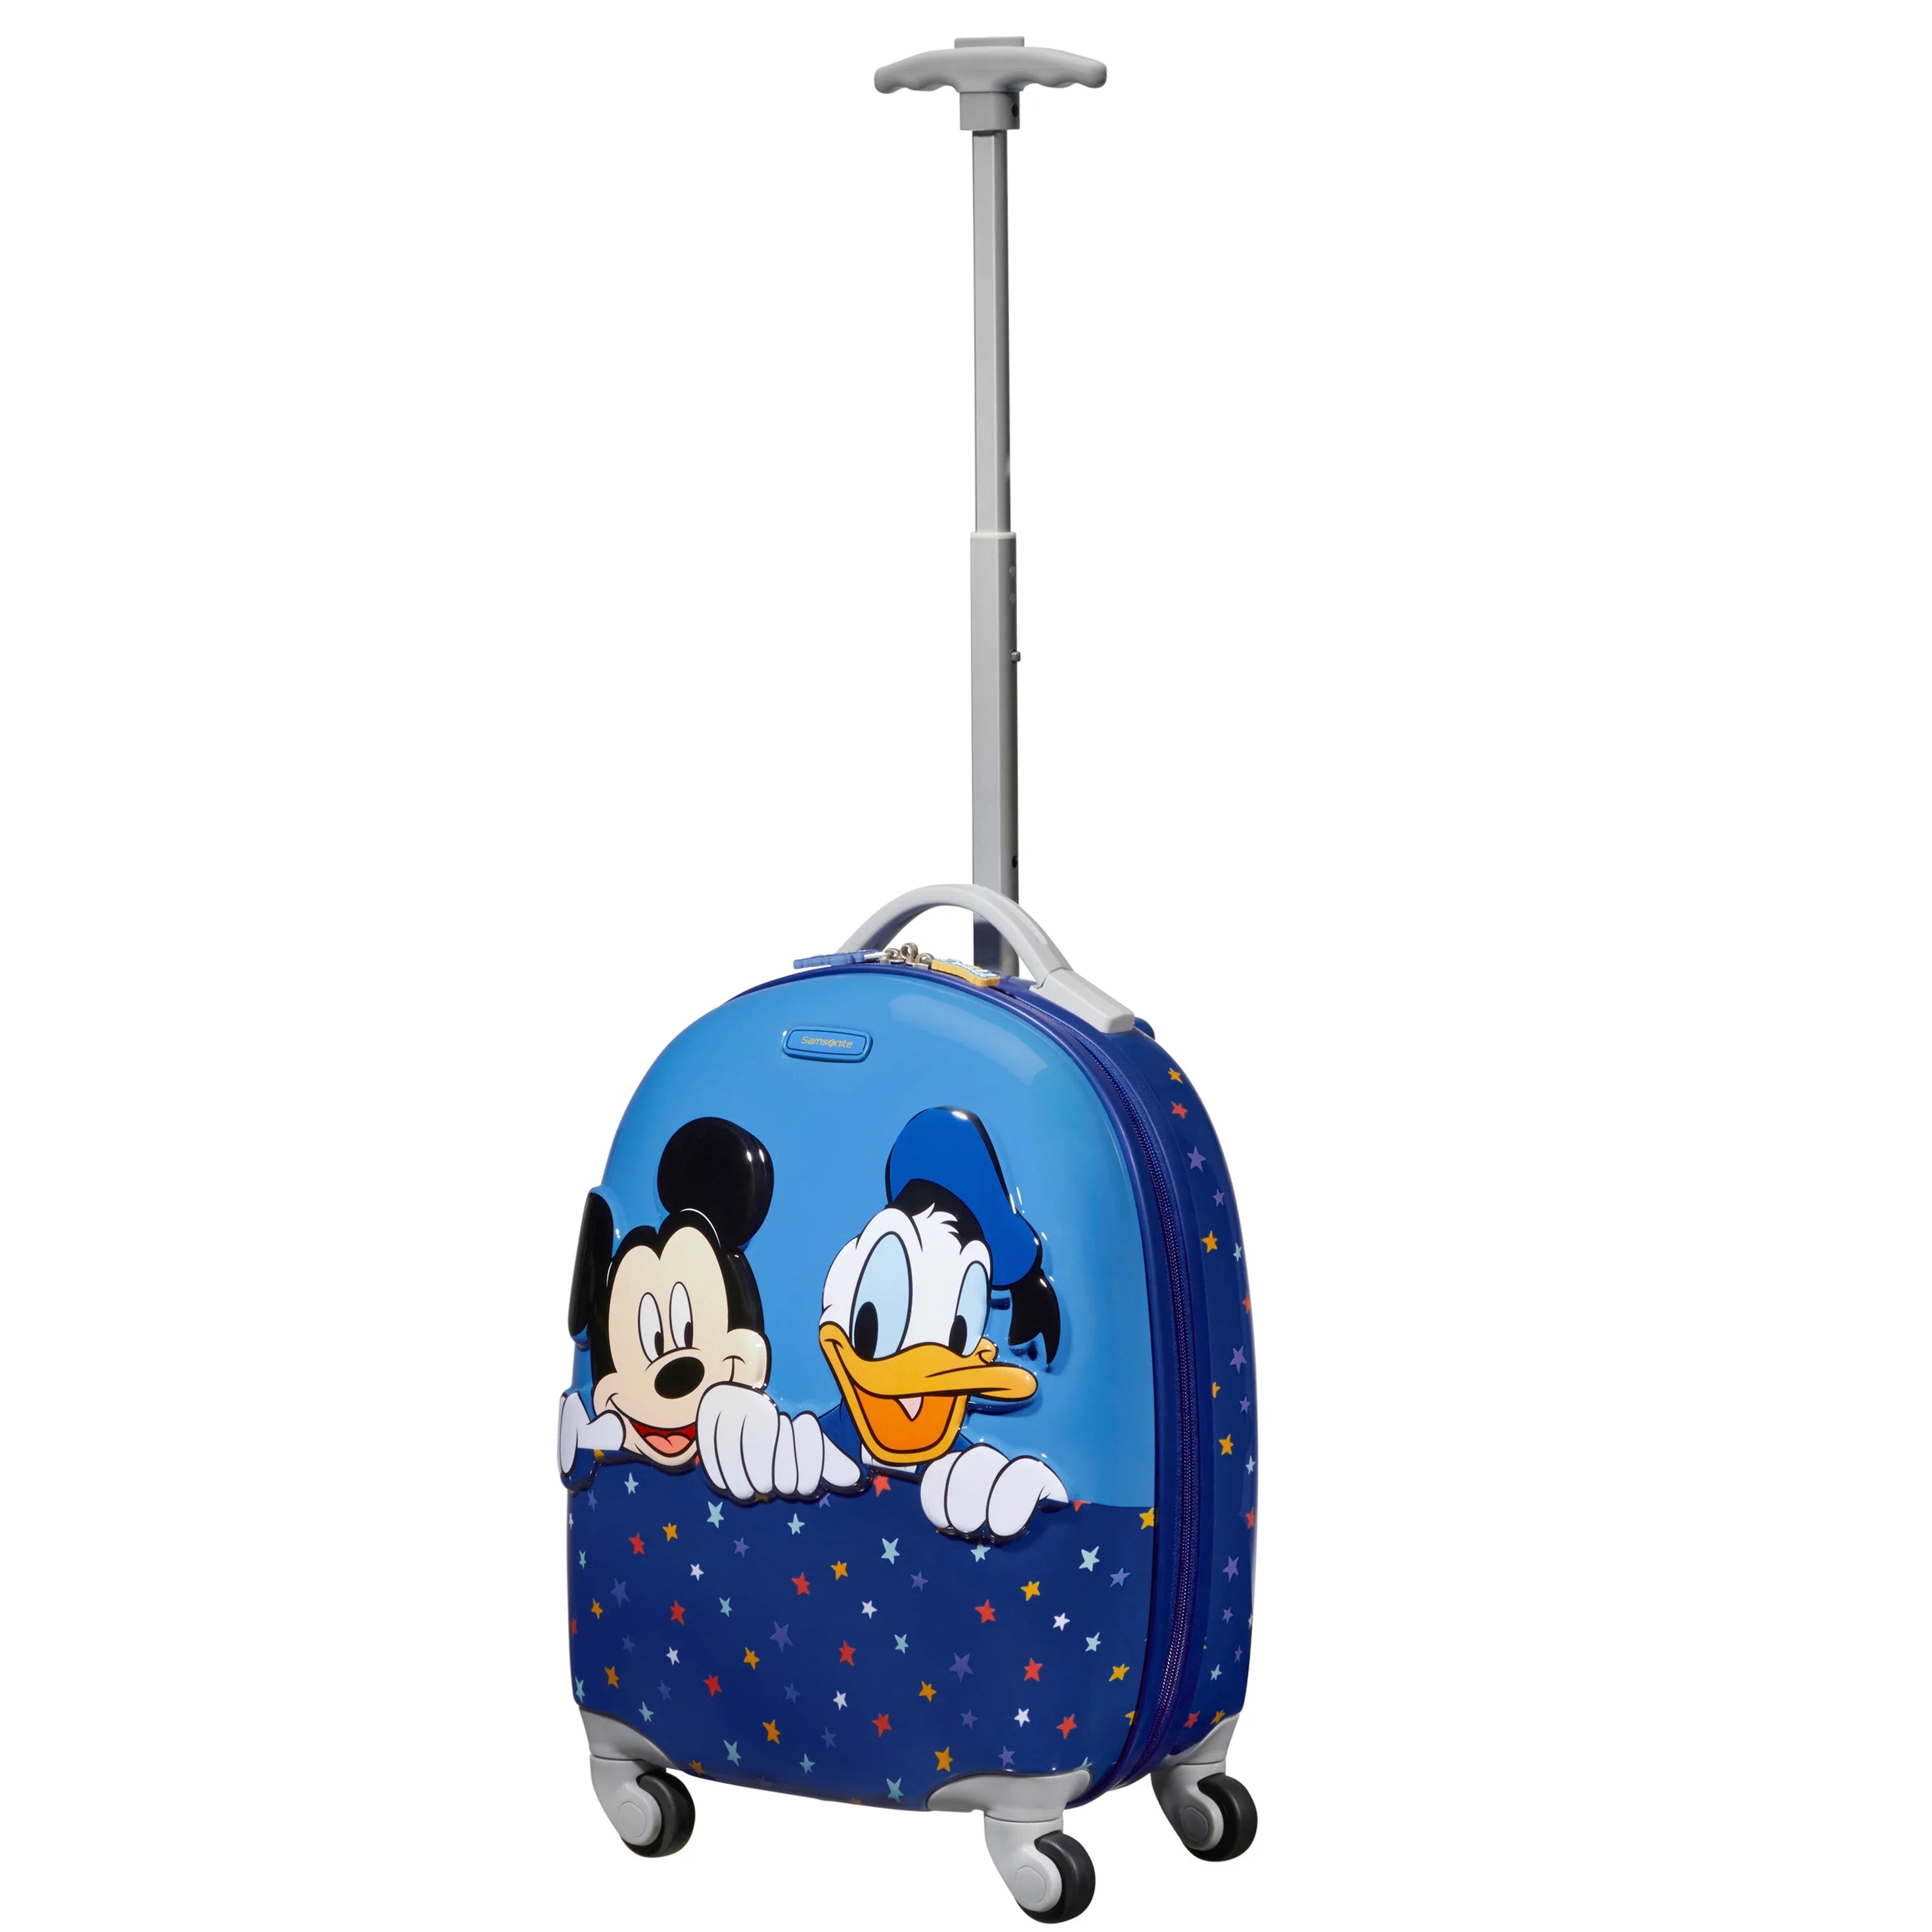 Disney Ulitmate 2.0 - Sweet companions for travel and leisure